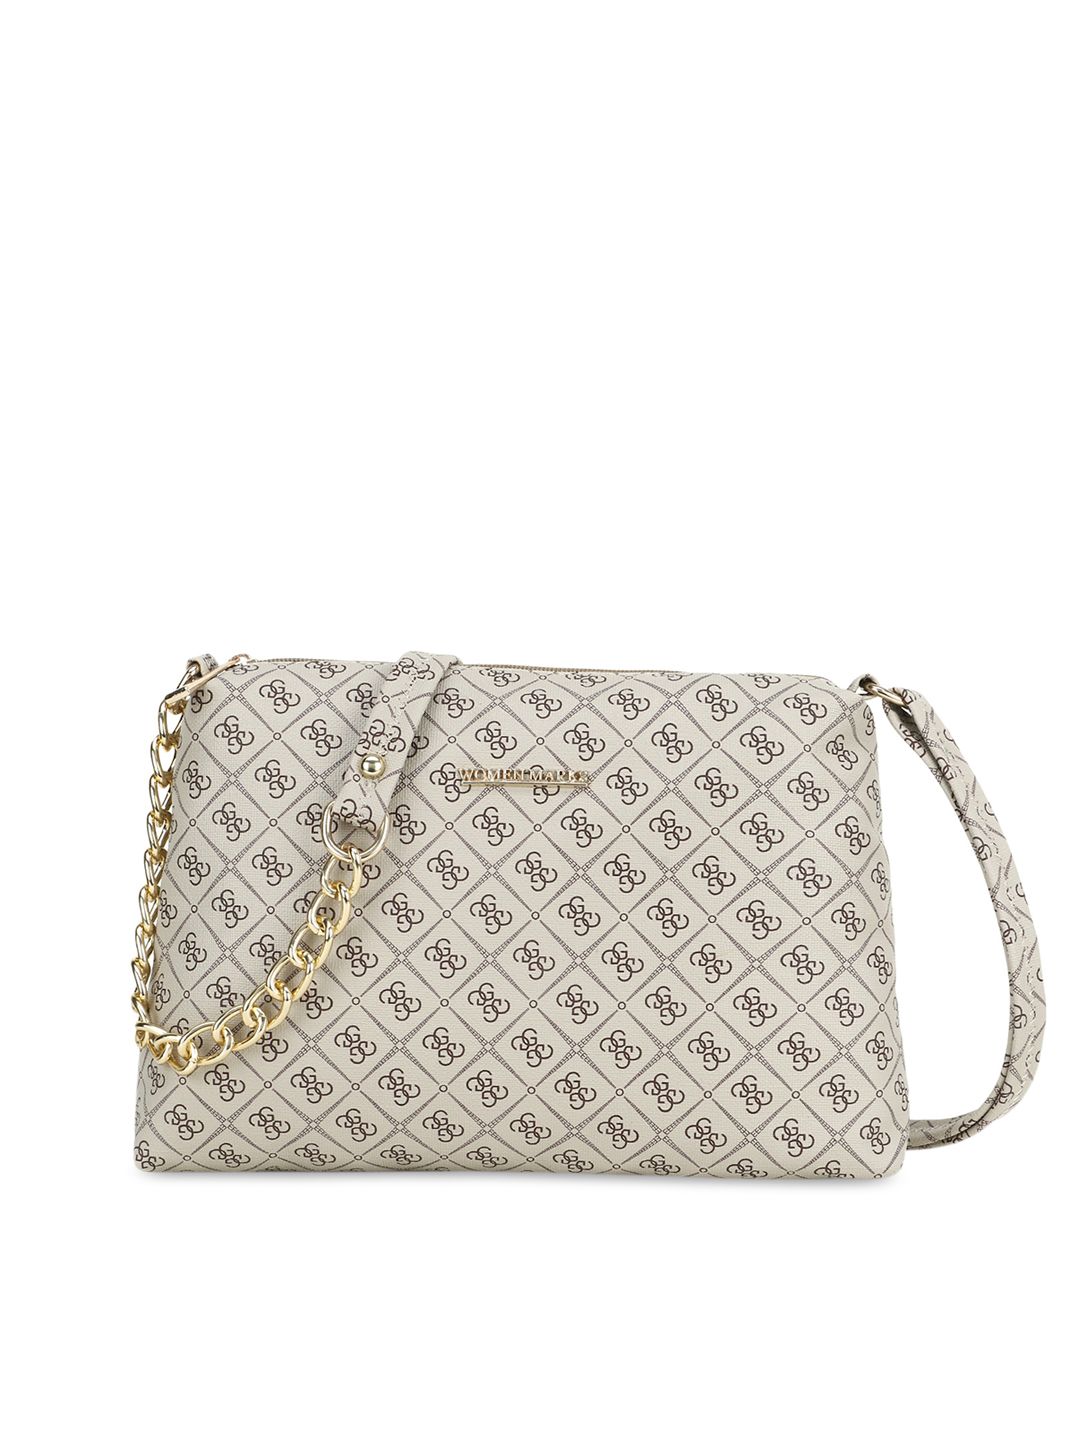 WOMEN MARKS Beige Printed Structured Sling Bag Price in India